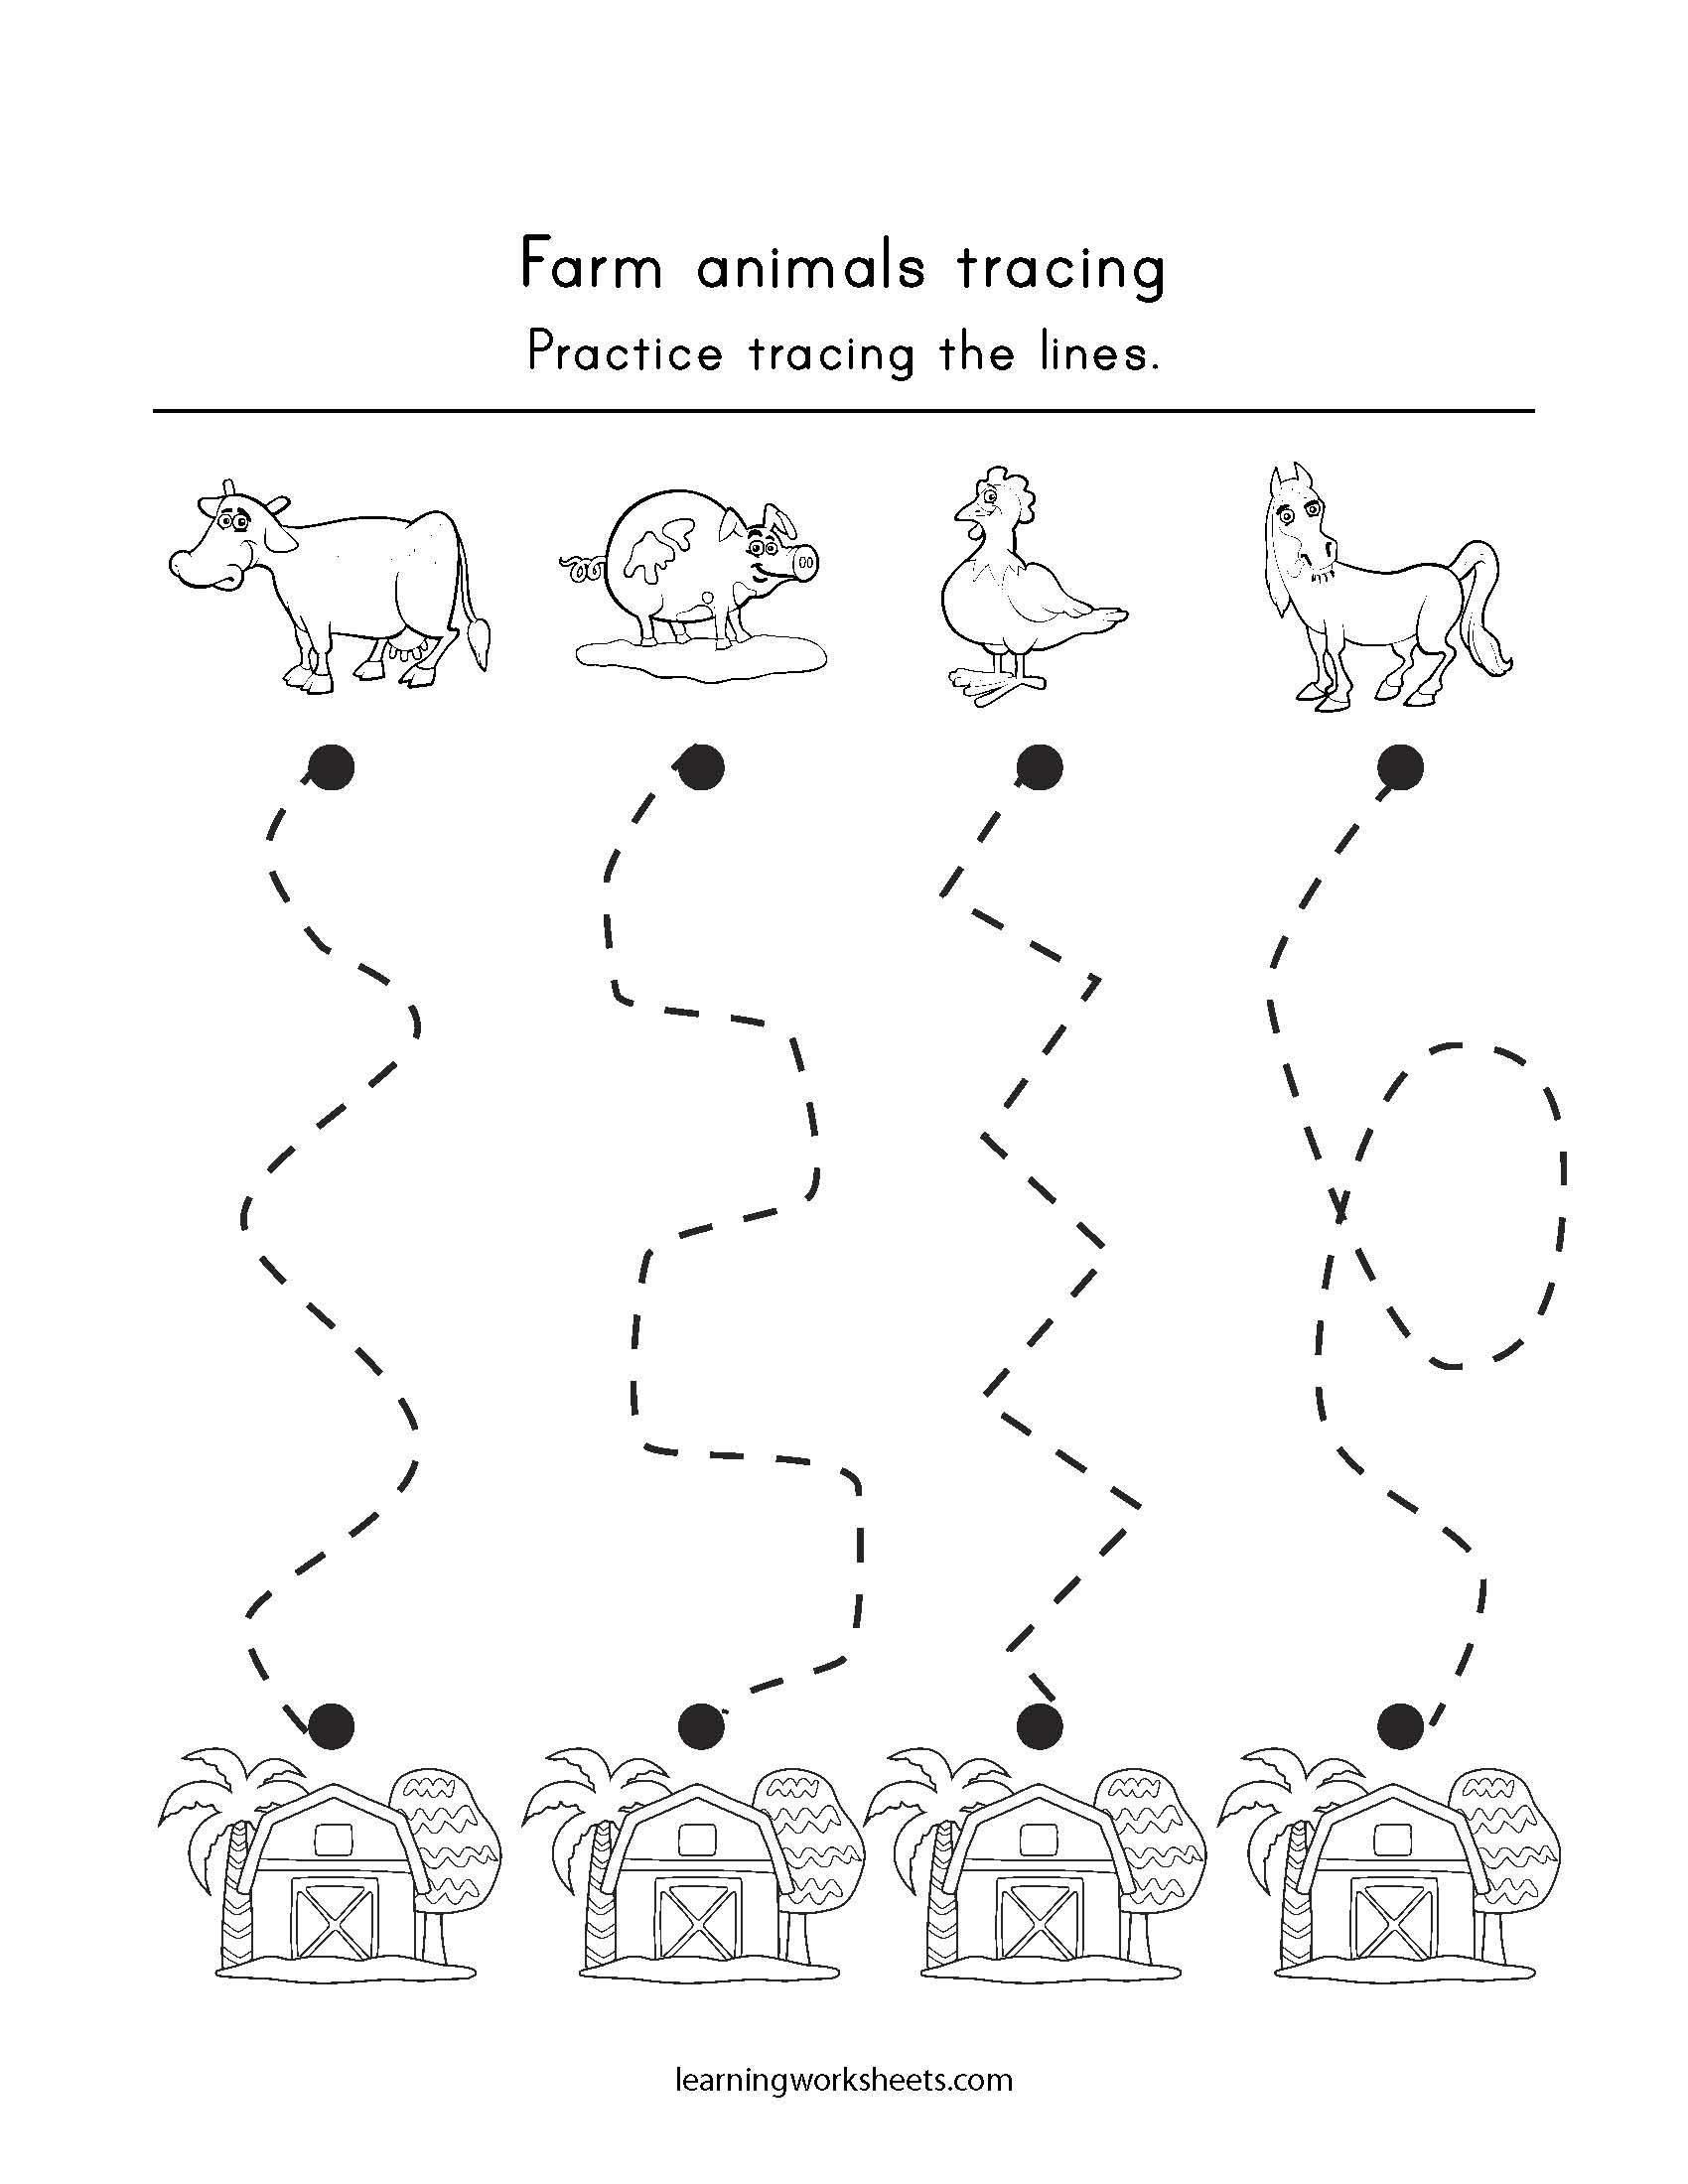 farm-animals-tracing-learning-worksheets-tracing-practice